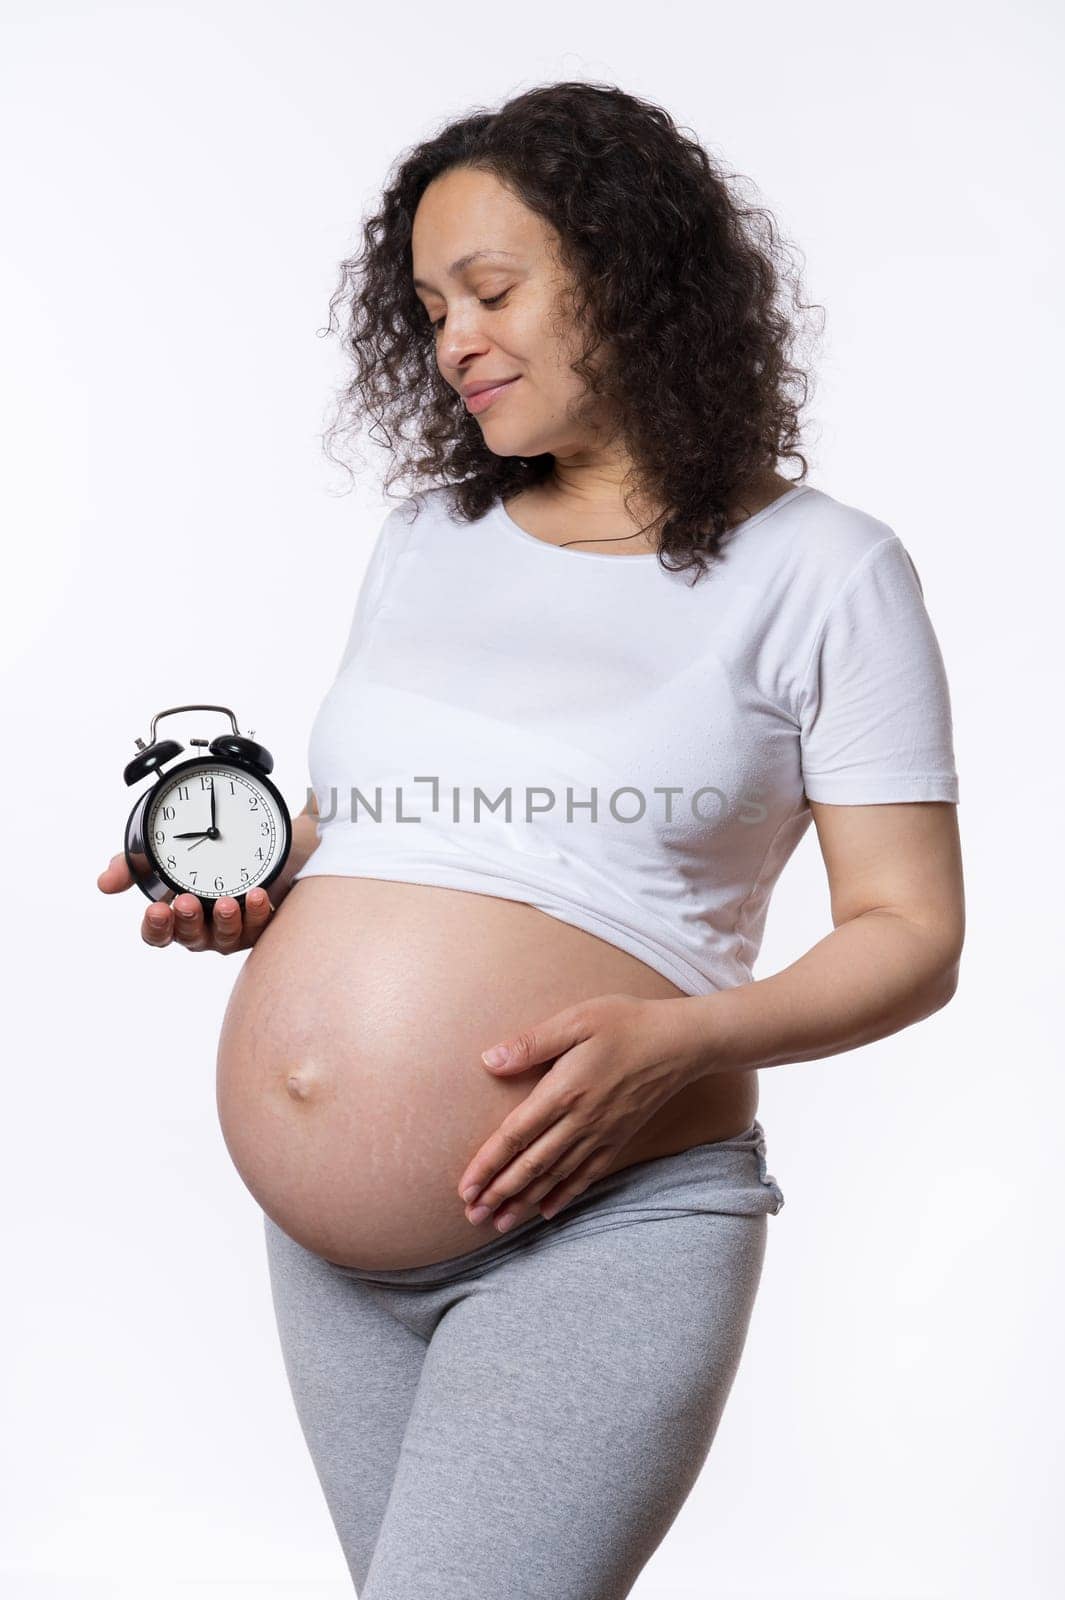 Happy pregnant woman caressing her tummy, holding alarm clock, isolated on white. Pregnancy and Baby's due date concept by artgf